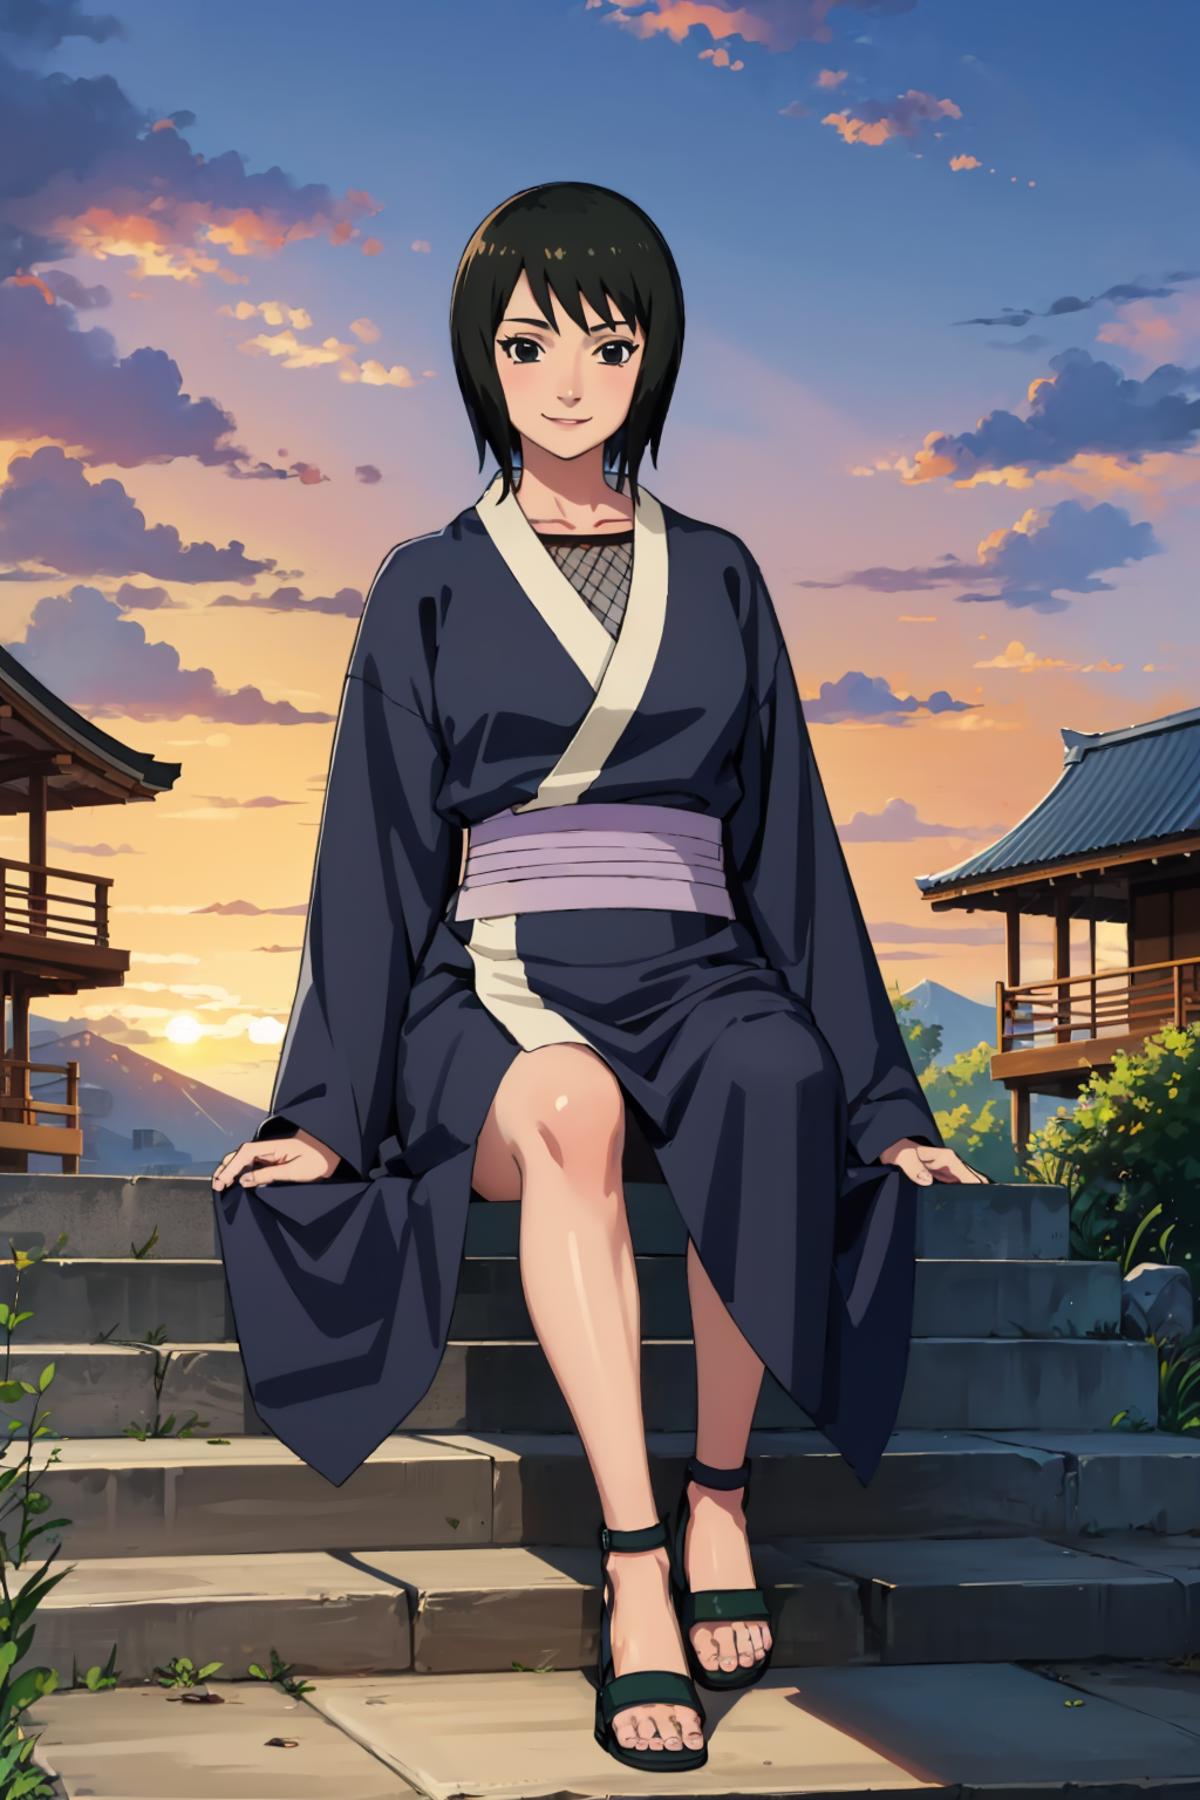 Anime Character Sitting on Stairs at Sunset.